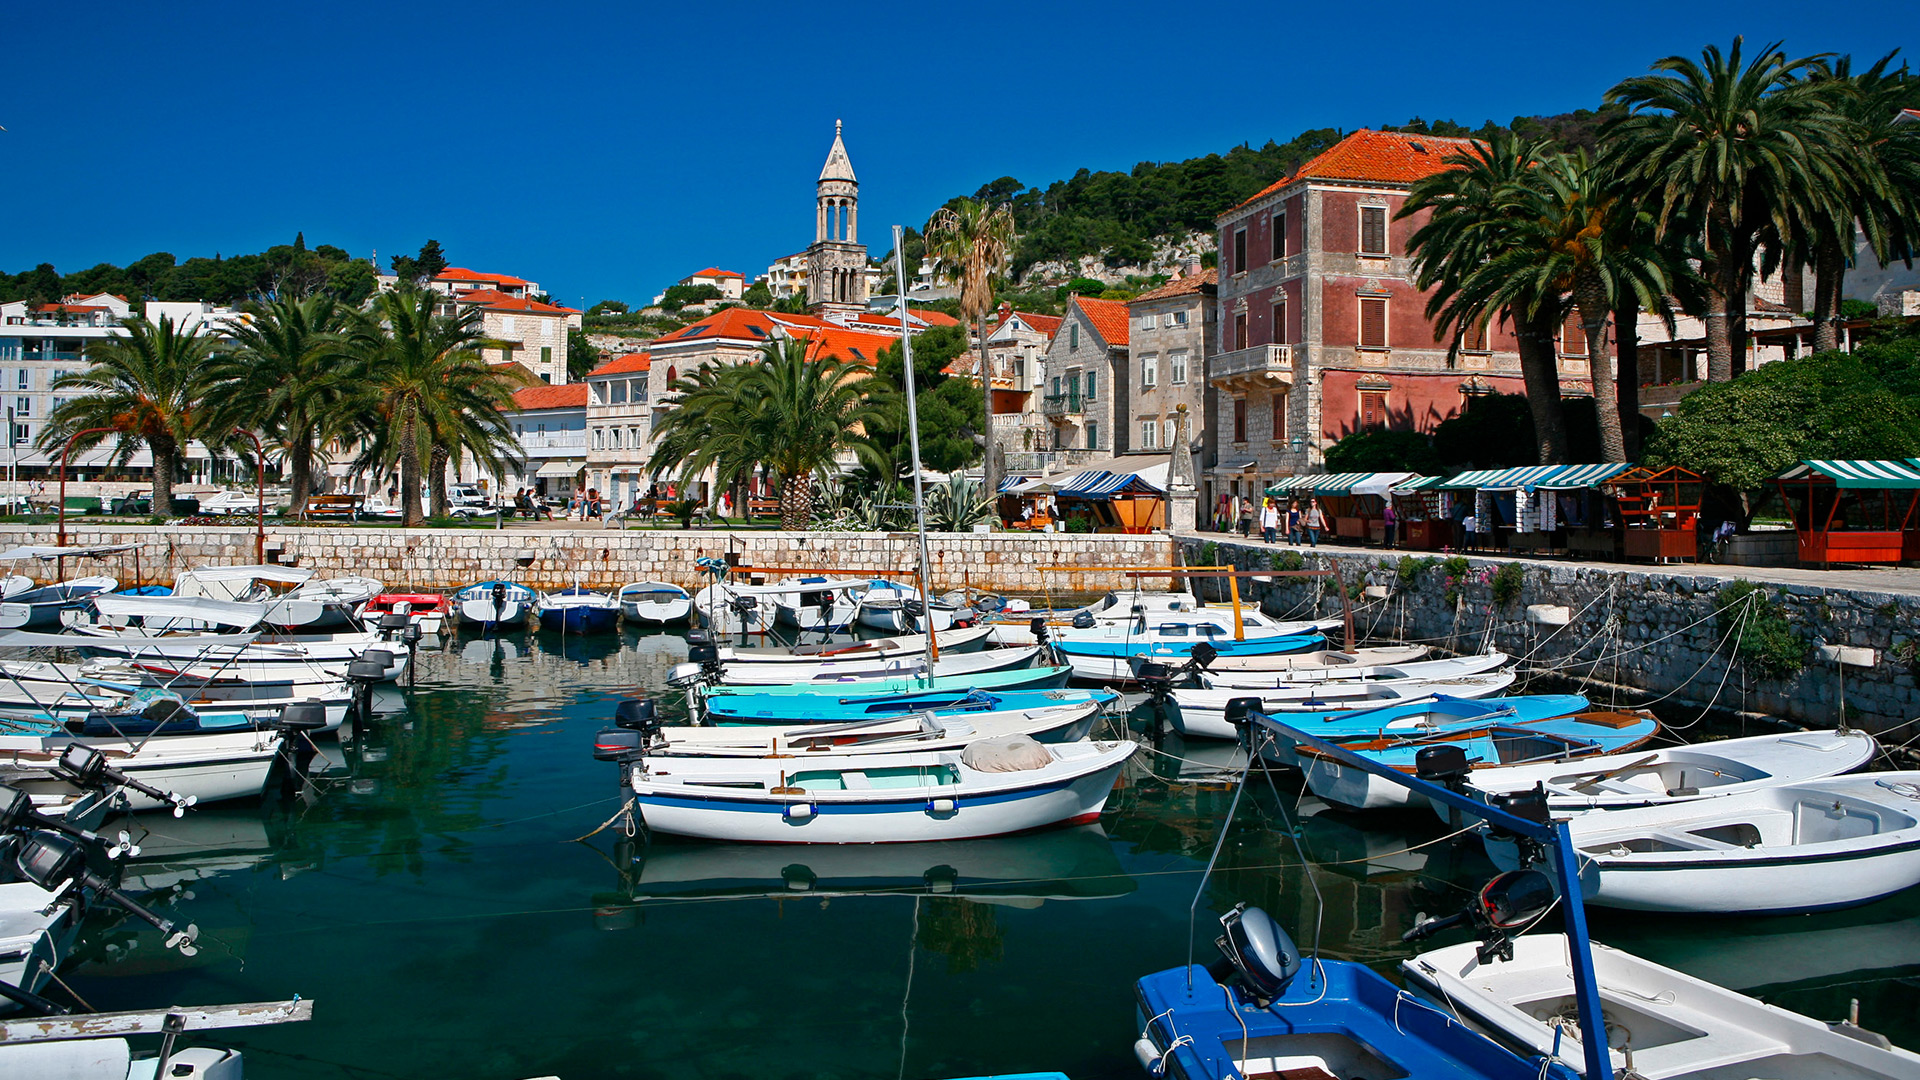 Boats at the waterfront of the Old town of Hvar, Hvar island, Croatia - SimpleSail sailing routes